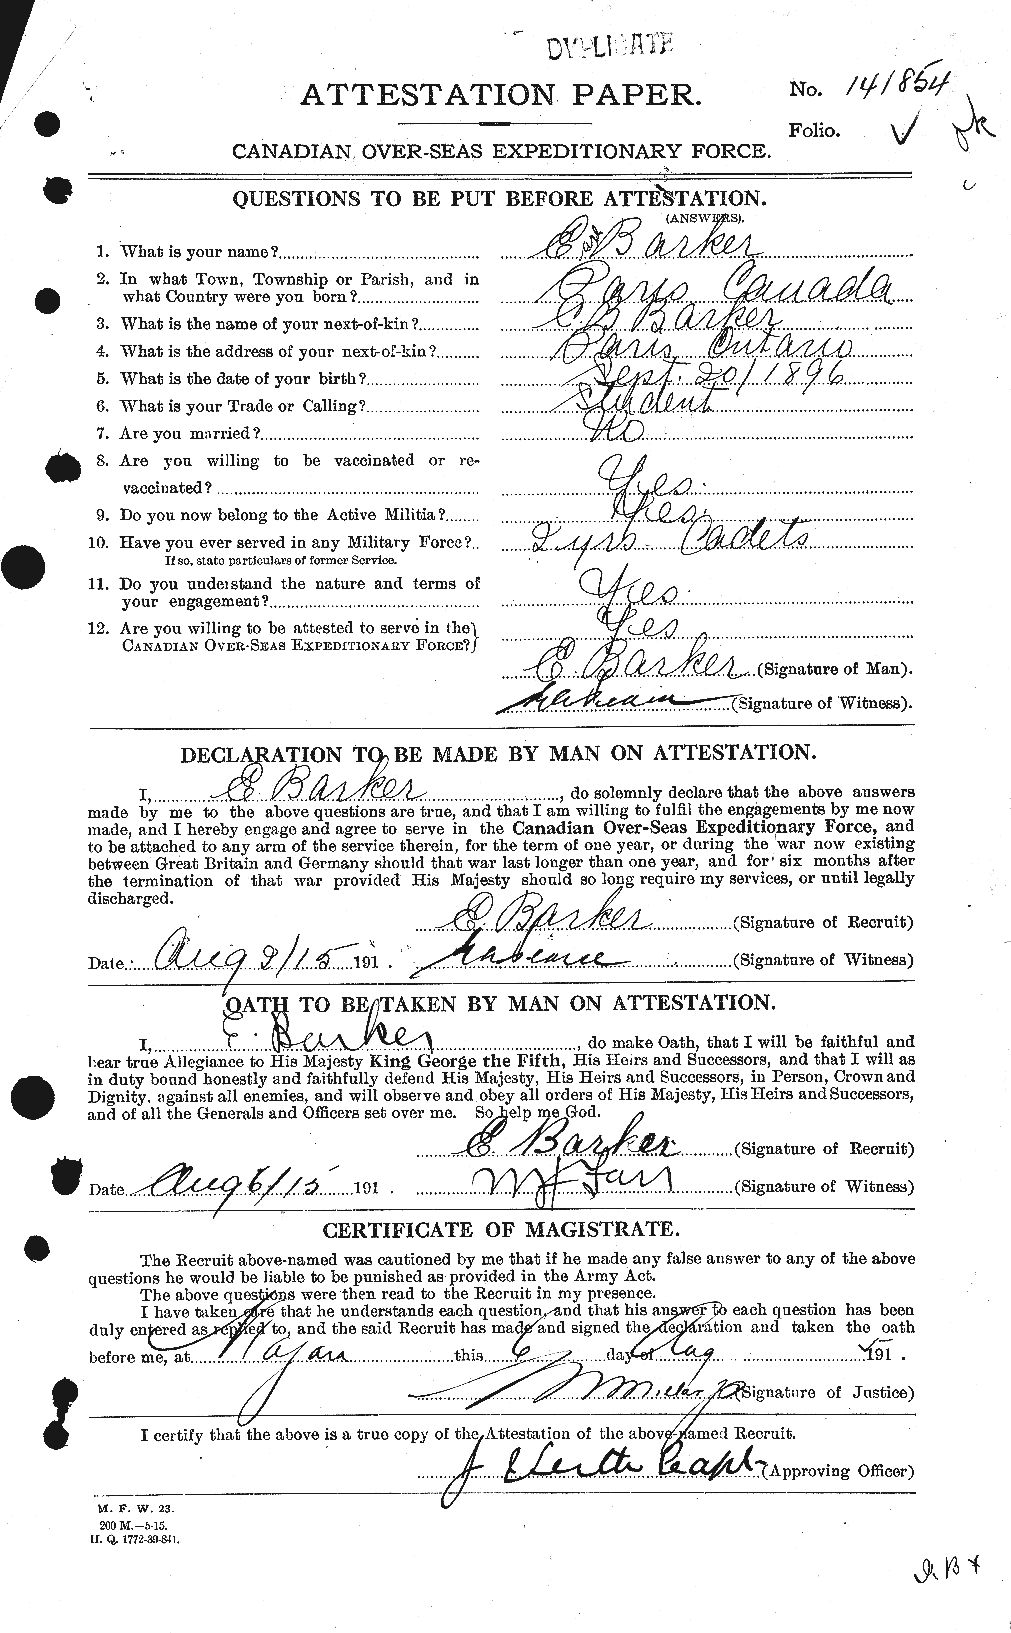 Personnel Records of the First World War - CEF 227598a